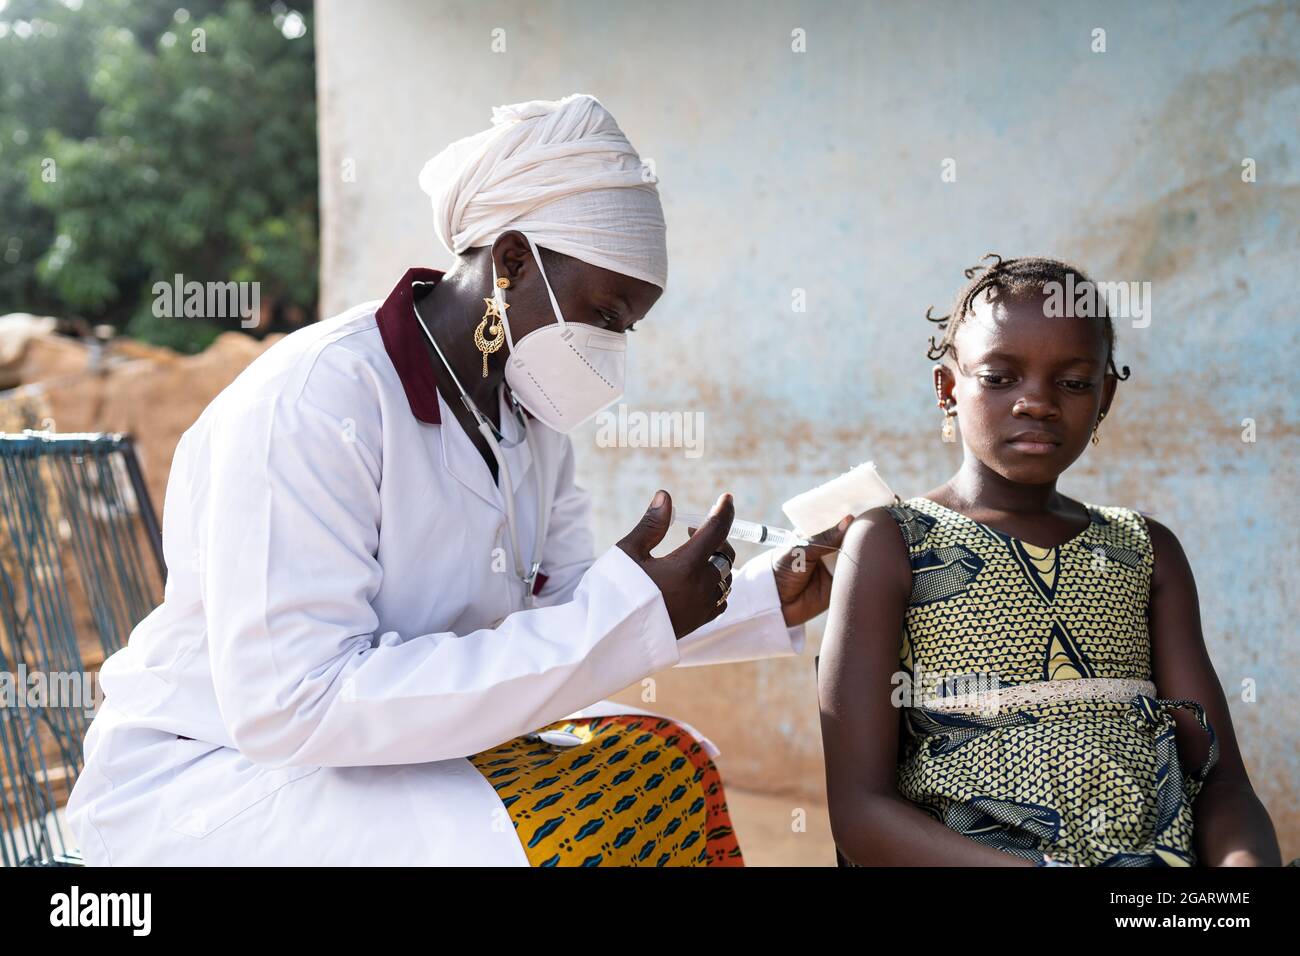 In this image, a black nurse with a big white facial mask is injecting a vaccine into the arm of an unsmiling little African girl both sitting outside Stock Photo